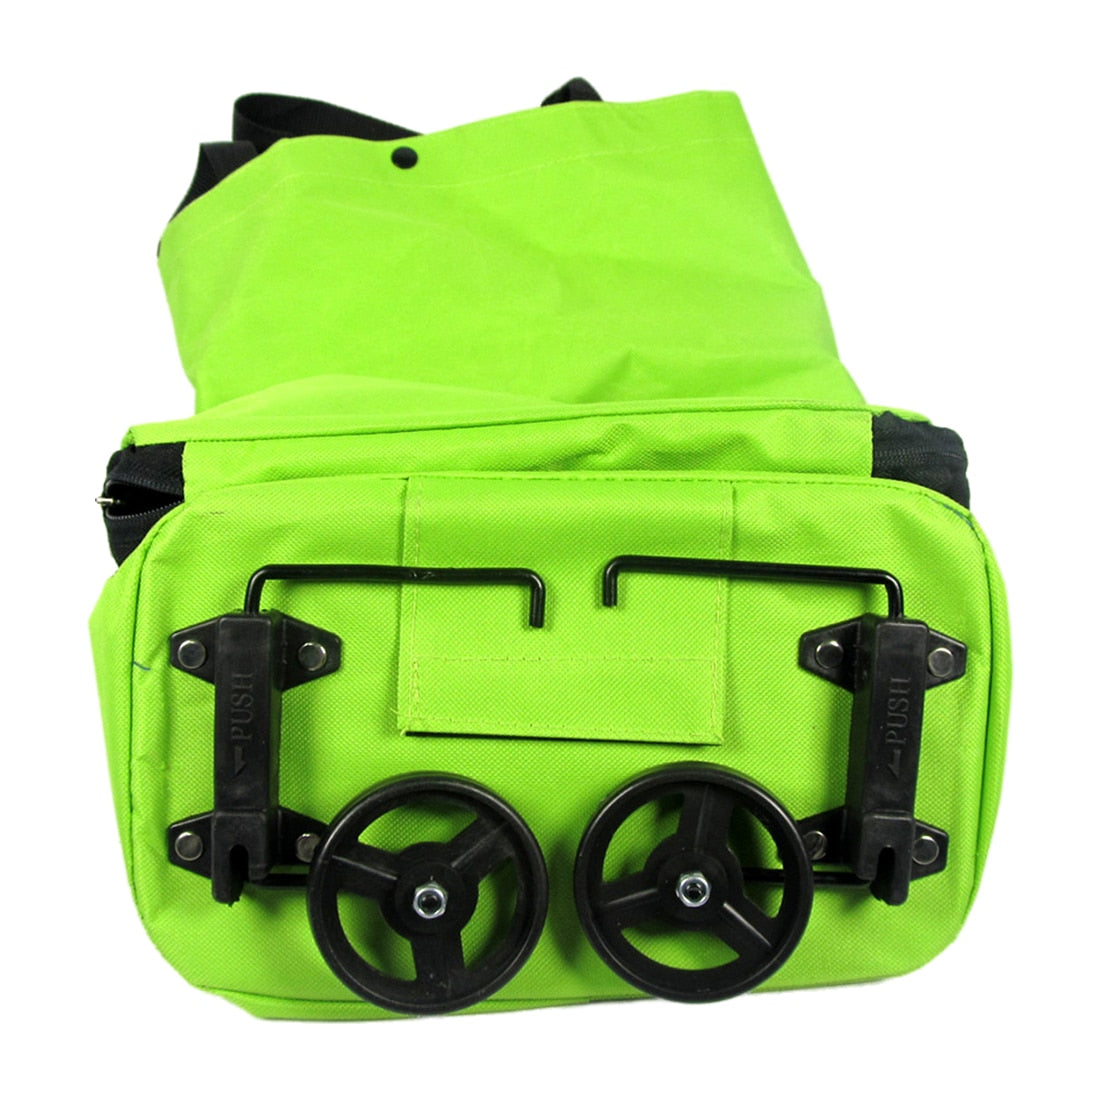 Portable Shopping Trolley Bag With Wheels Foldable Cart Rolling Grocery Green - ebowsos